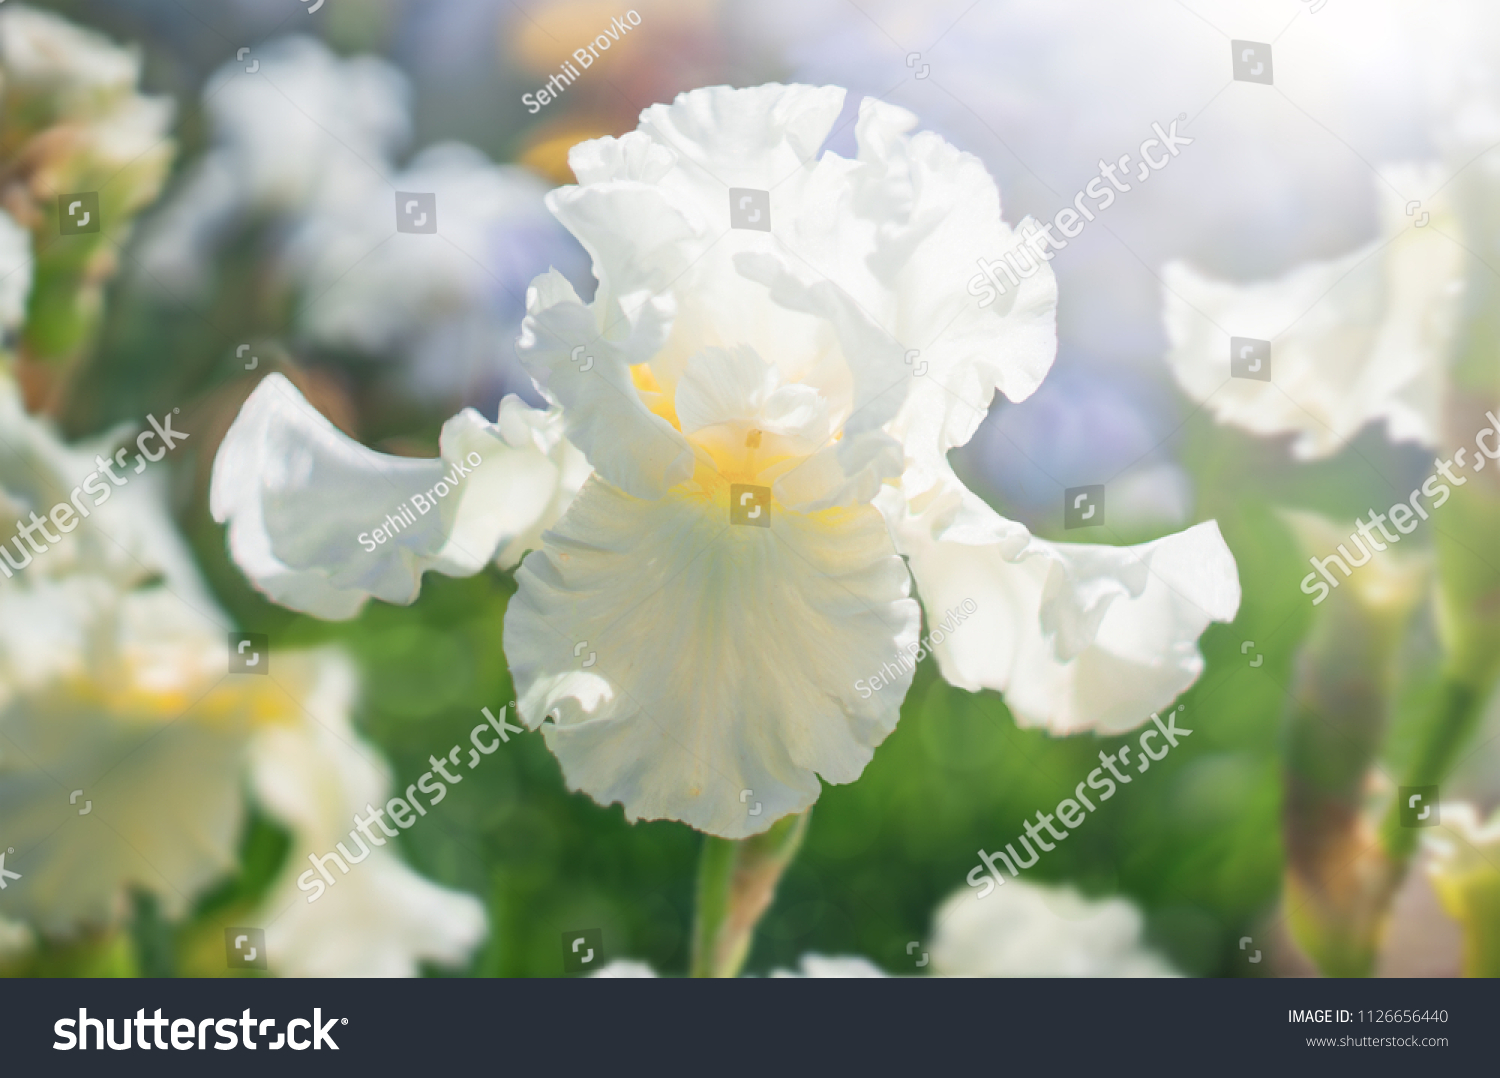 White flower Iris flowering against a background of flowers. Nature. #1126656440